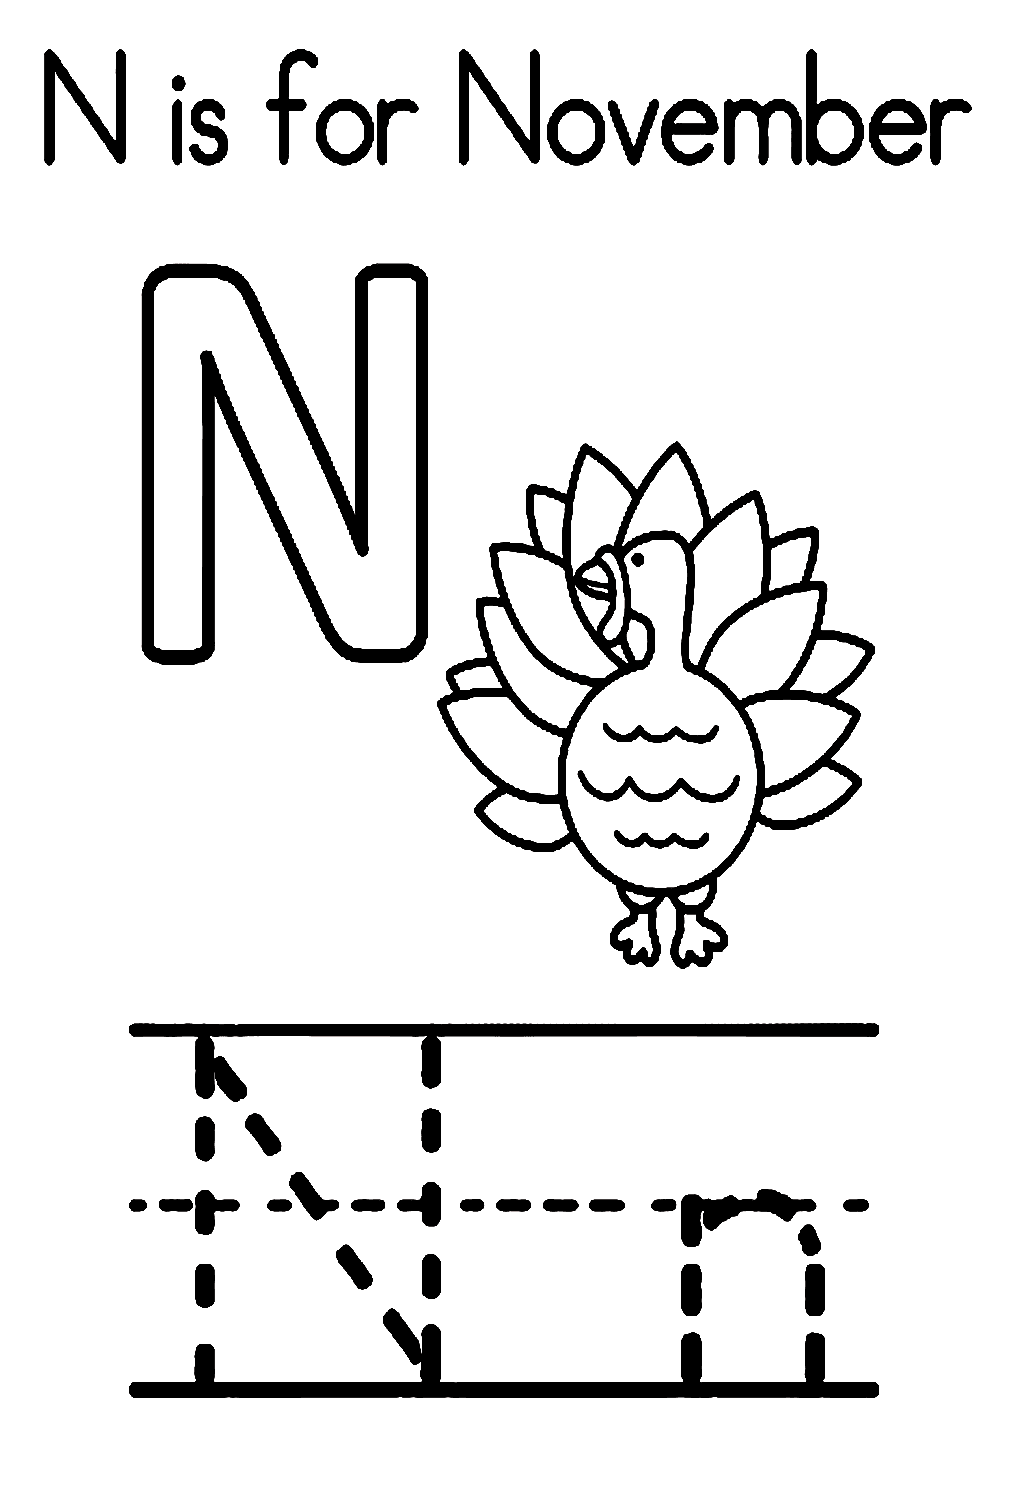 N is for November from Nature & Seasons